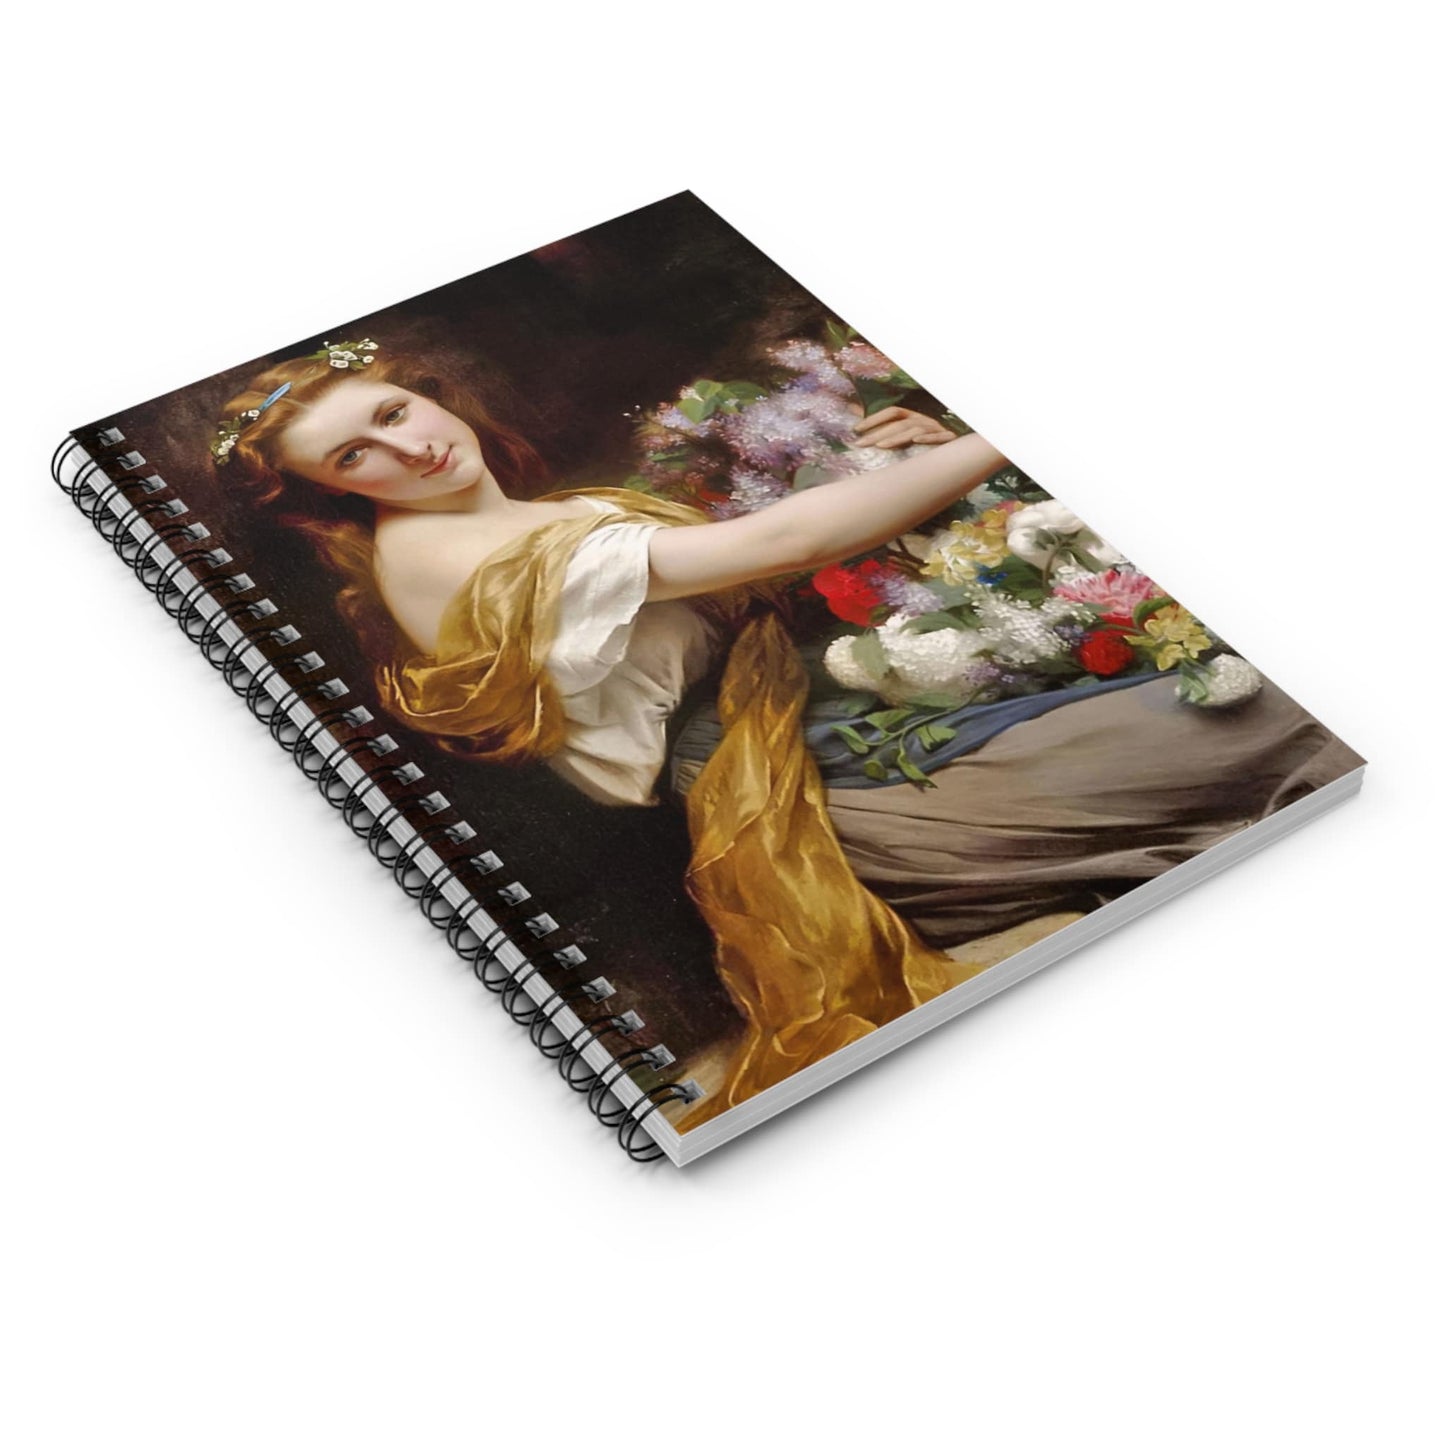 Young Maiden Spiral Notebook Laying Flat on White Surface